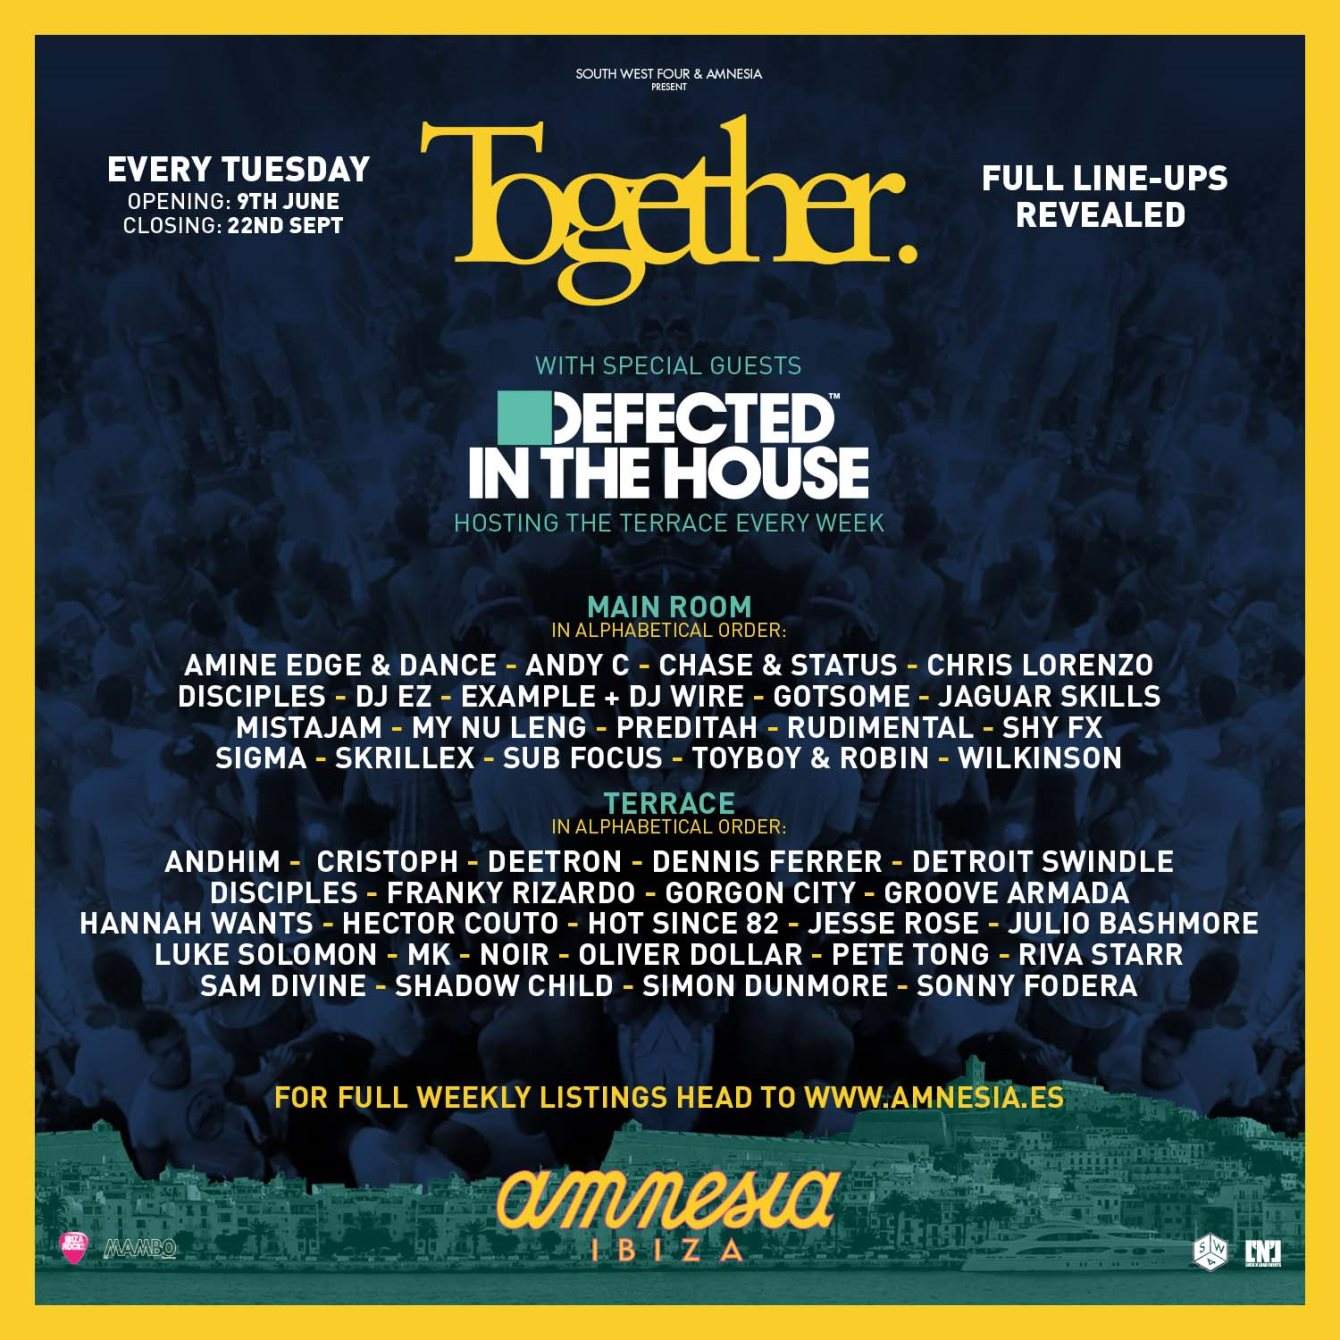 Together with Sub Focus, Sigma,Pete Tong, Hot Since 82 - Página trasera